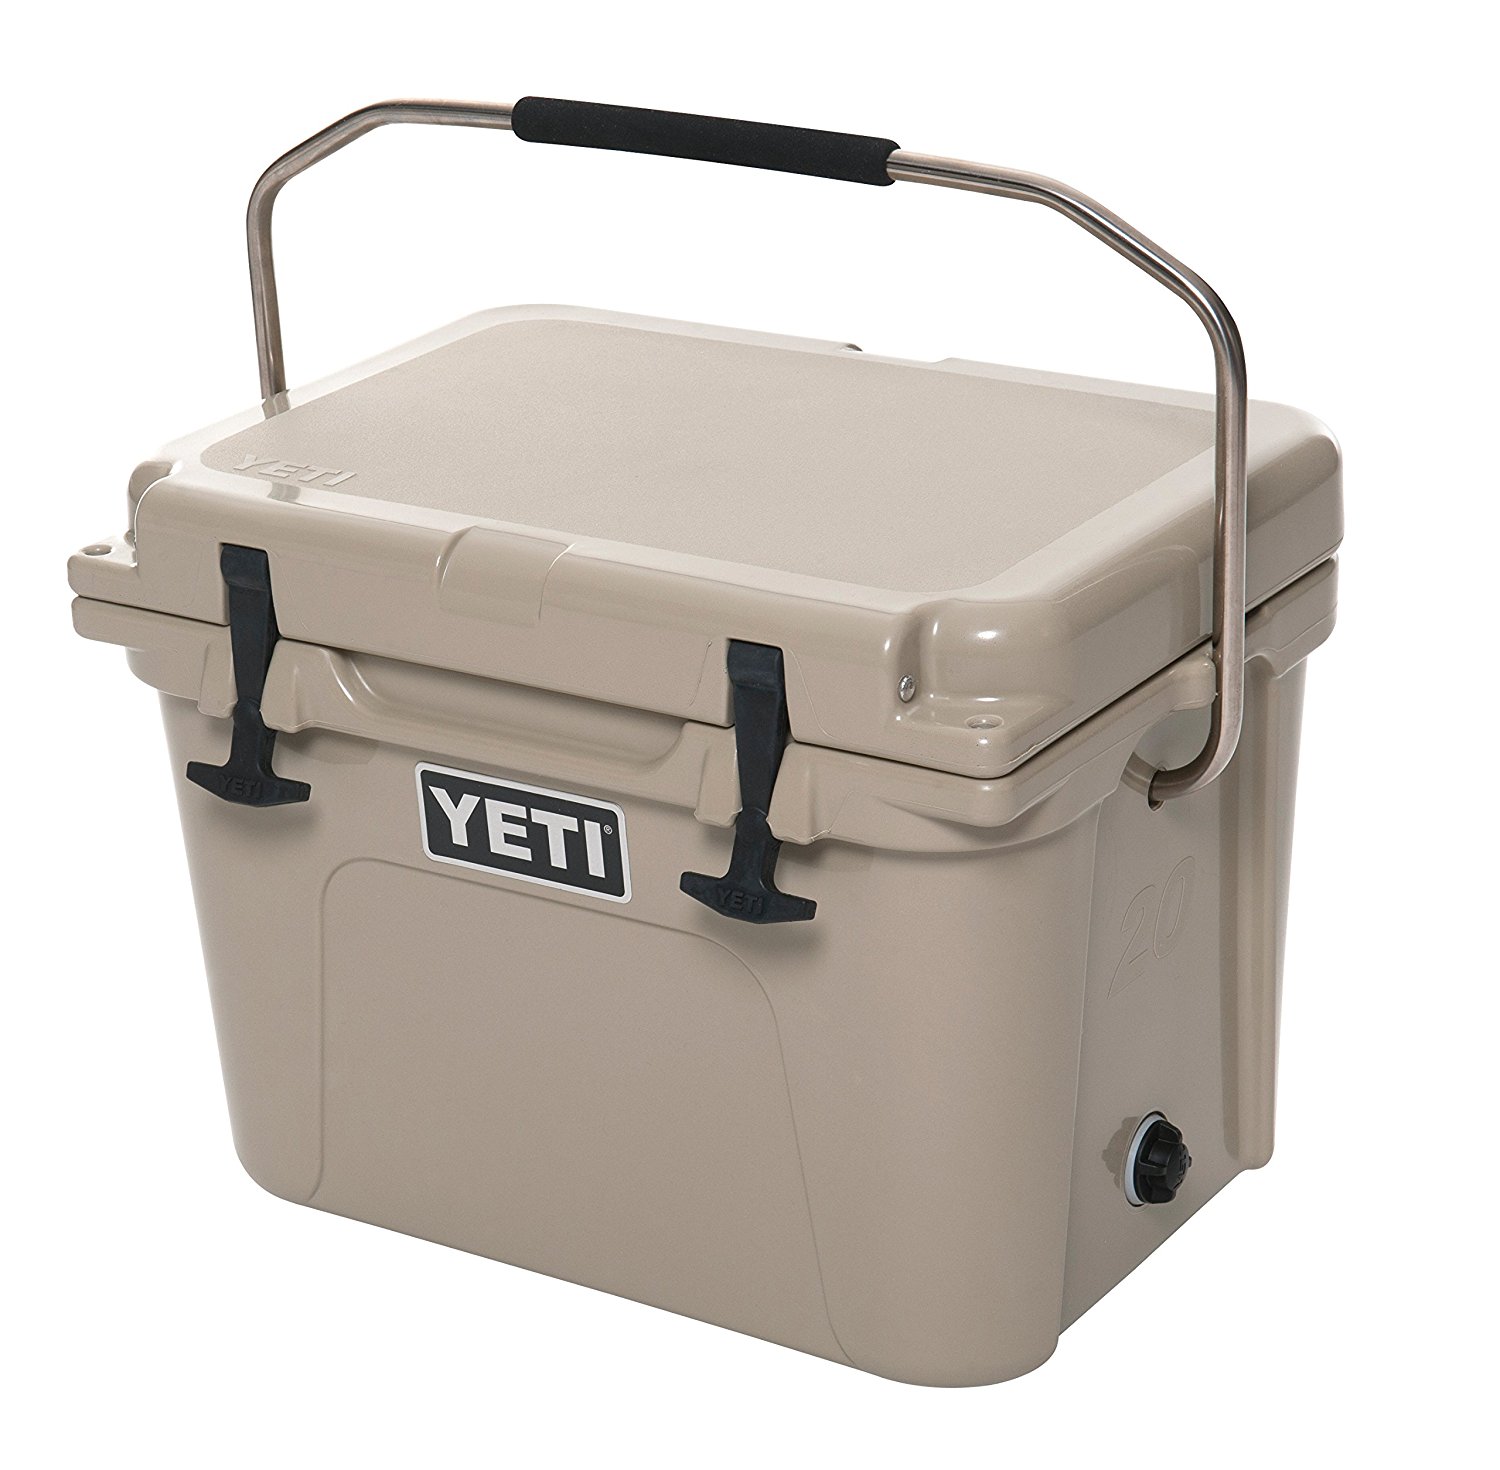 Yeti dupes! $4.99. Yeti on the left. Aldi on the right. Also comes in navy  and brick red! : r/aldi